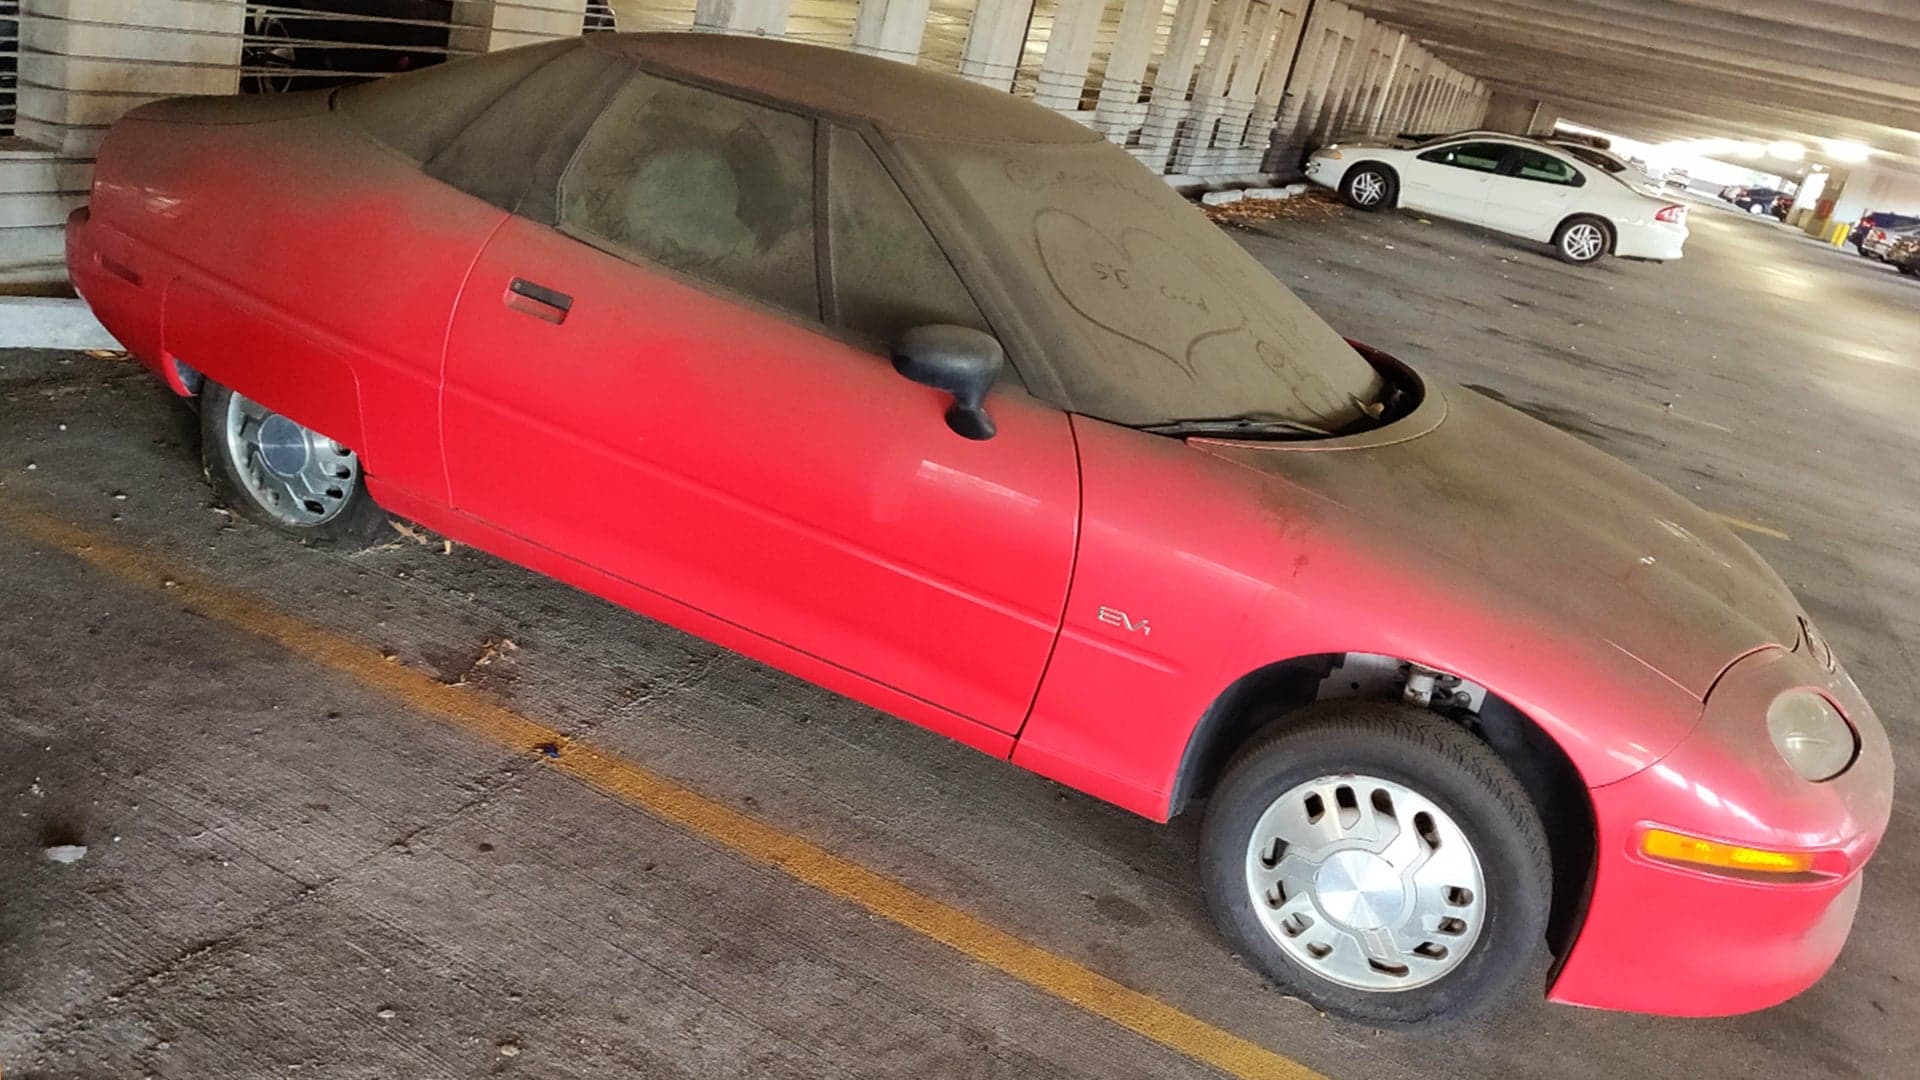 There’s an Ultra-Rare GM EV1 Abandoned in an Atlanta Parking Garage